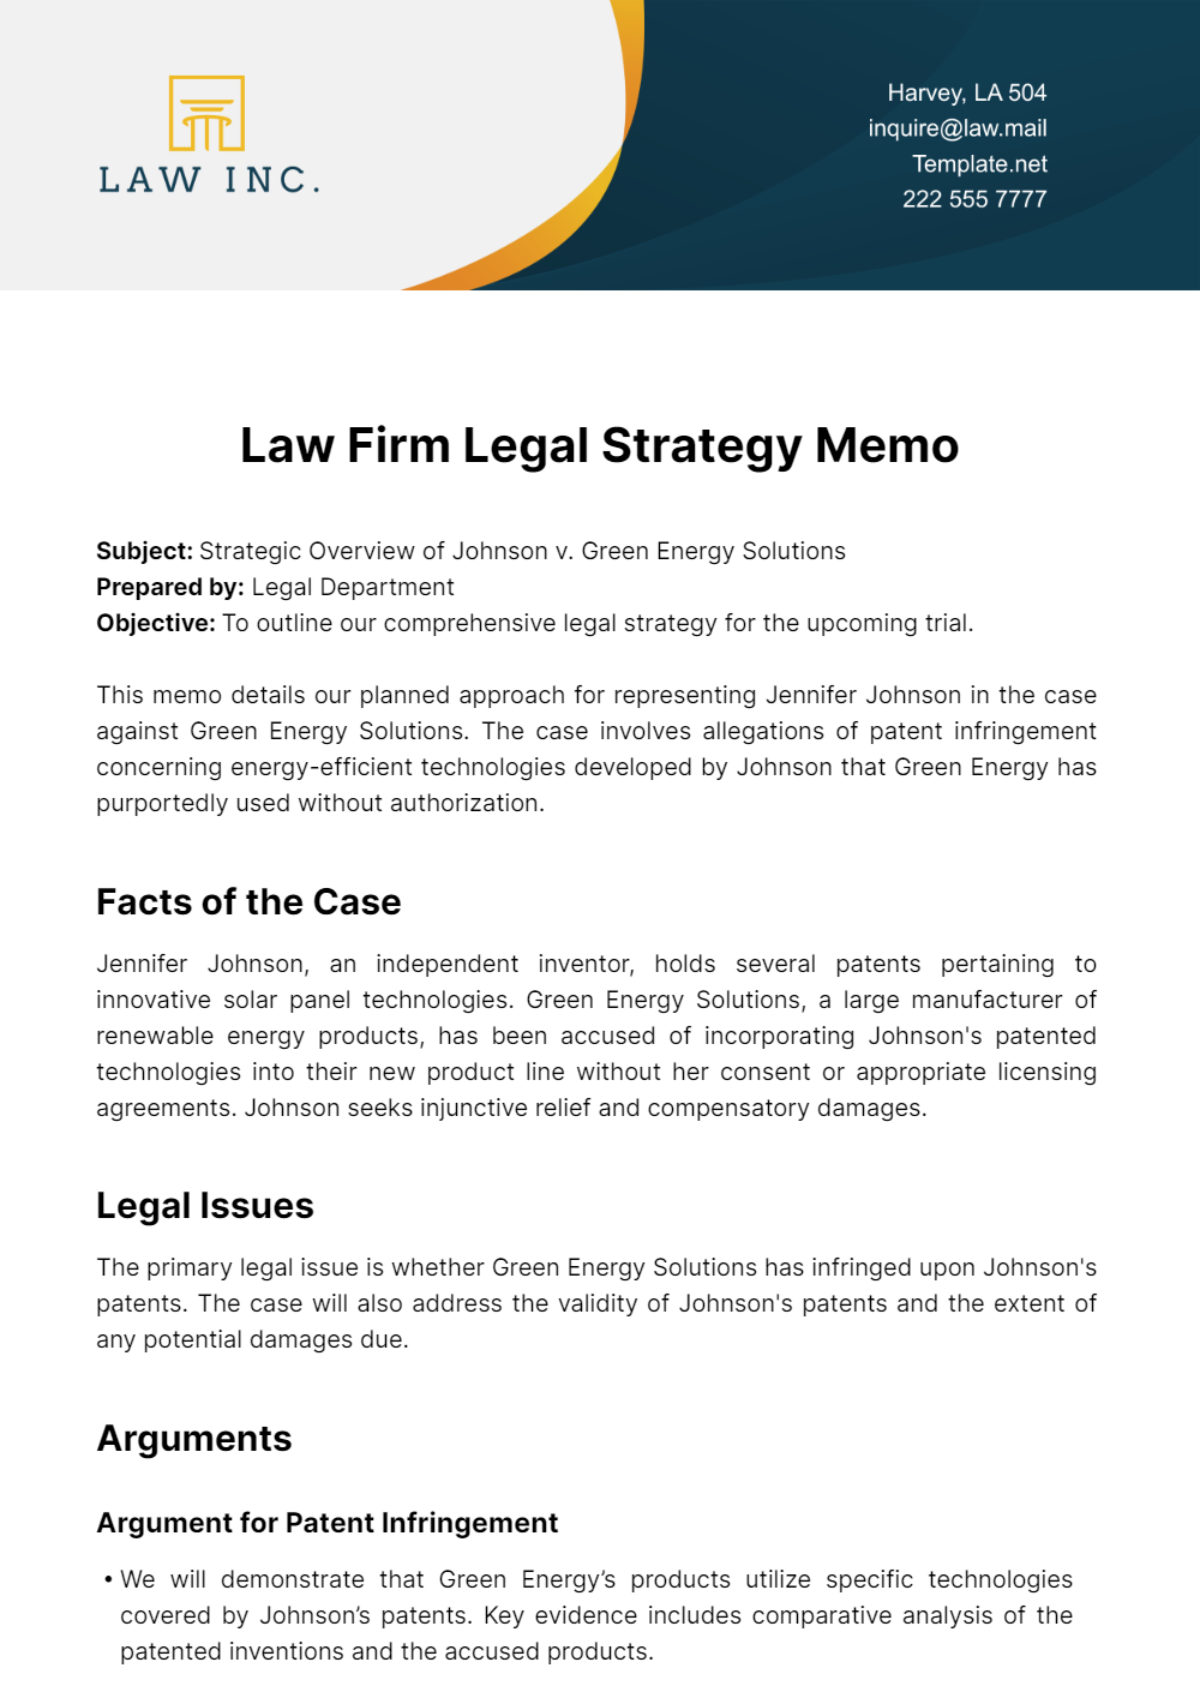 Law Firm Legal Strategy Memo Template